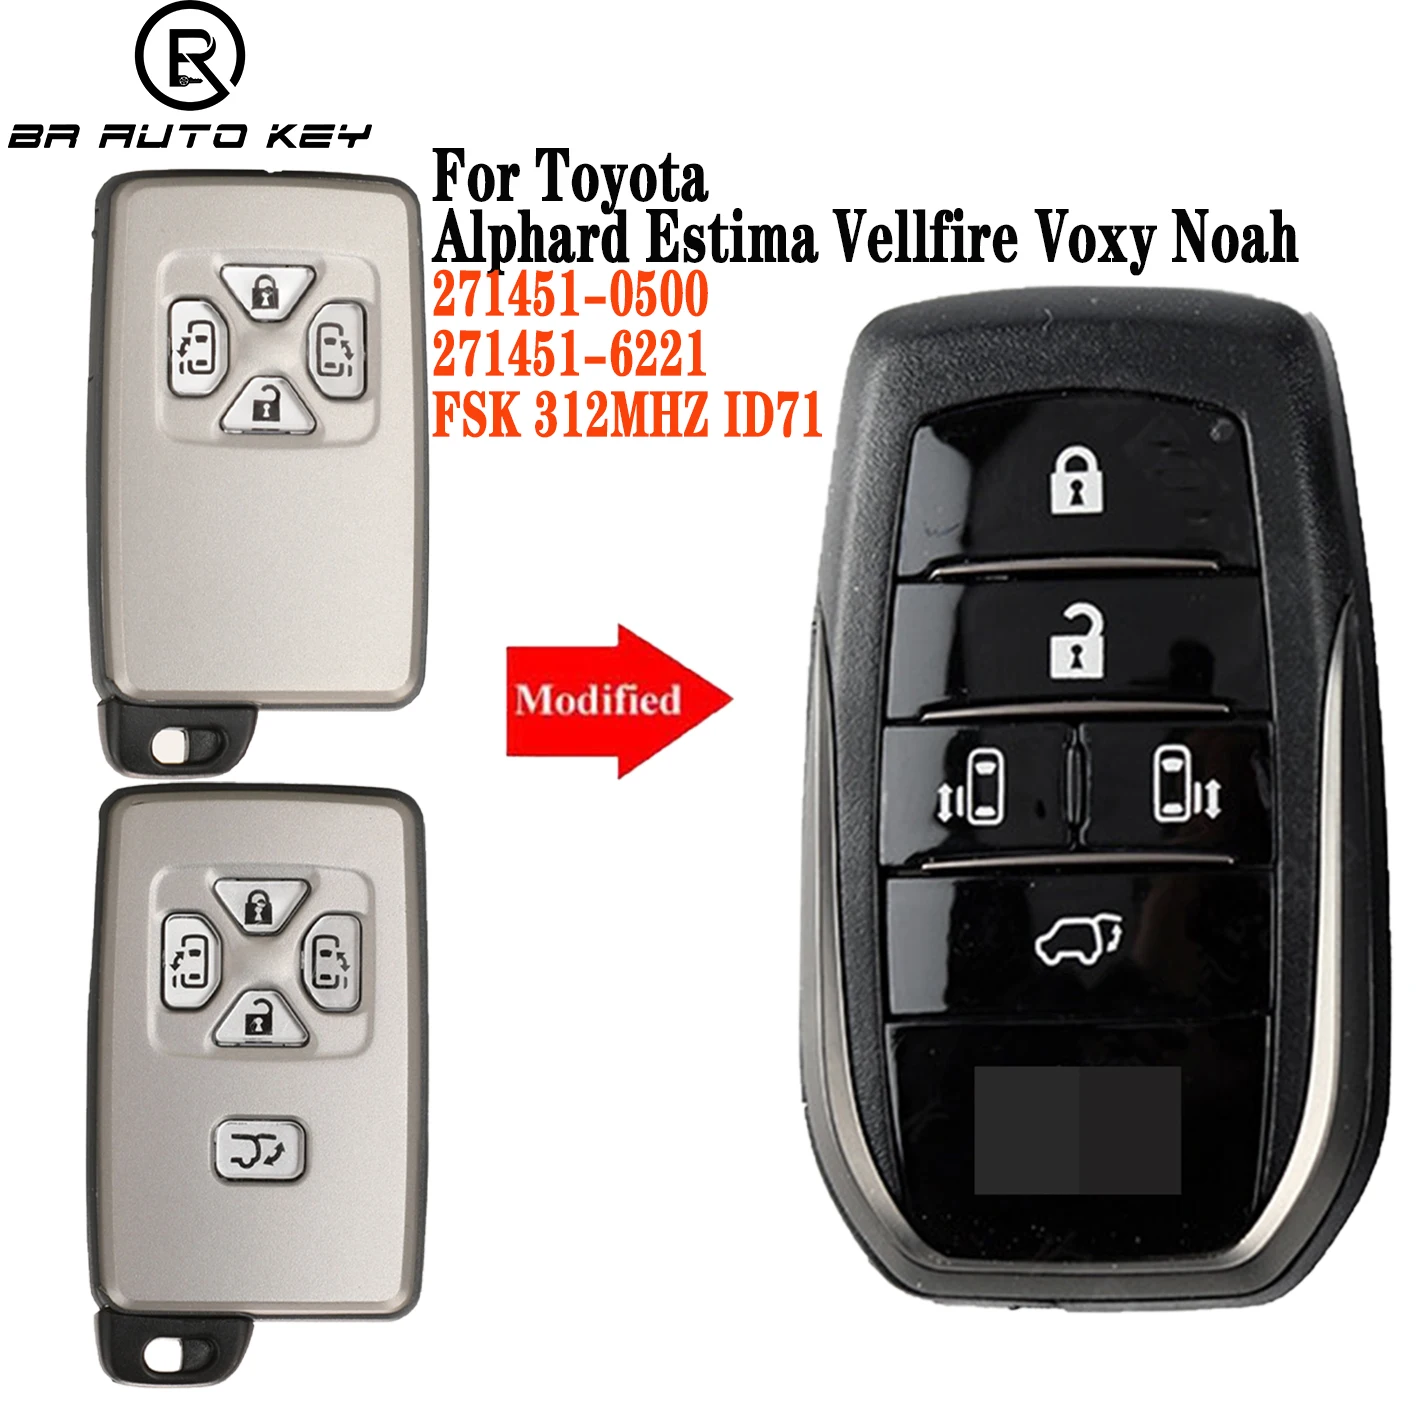 Upgrade Replacement Smart Remote Key for Toyota Alphard Vellfire Previa Voxy Noah 2005-2014 Board NO:271451-6221 FSK312mhz ID71